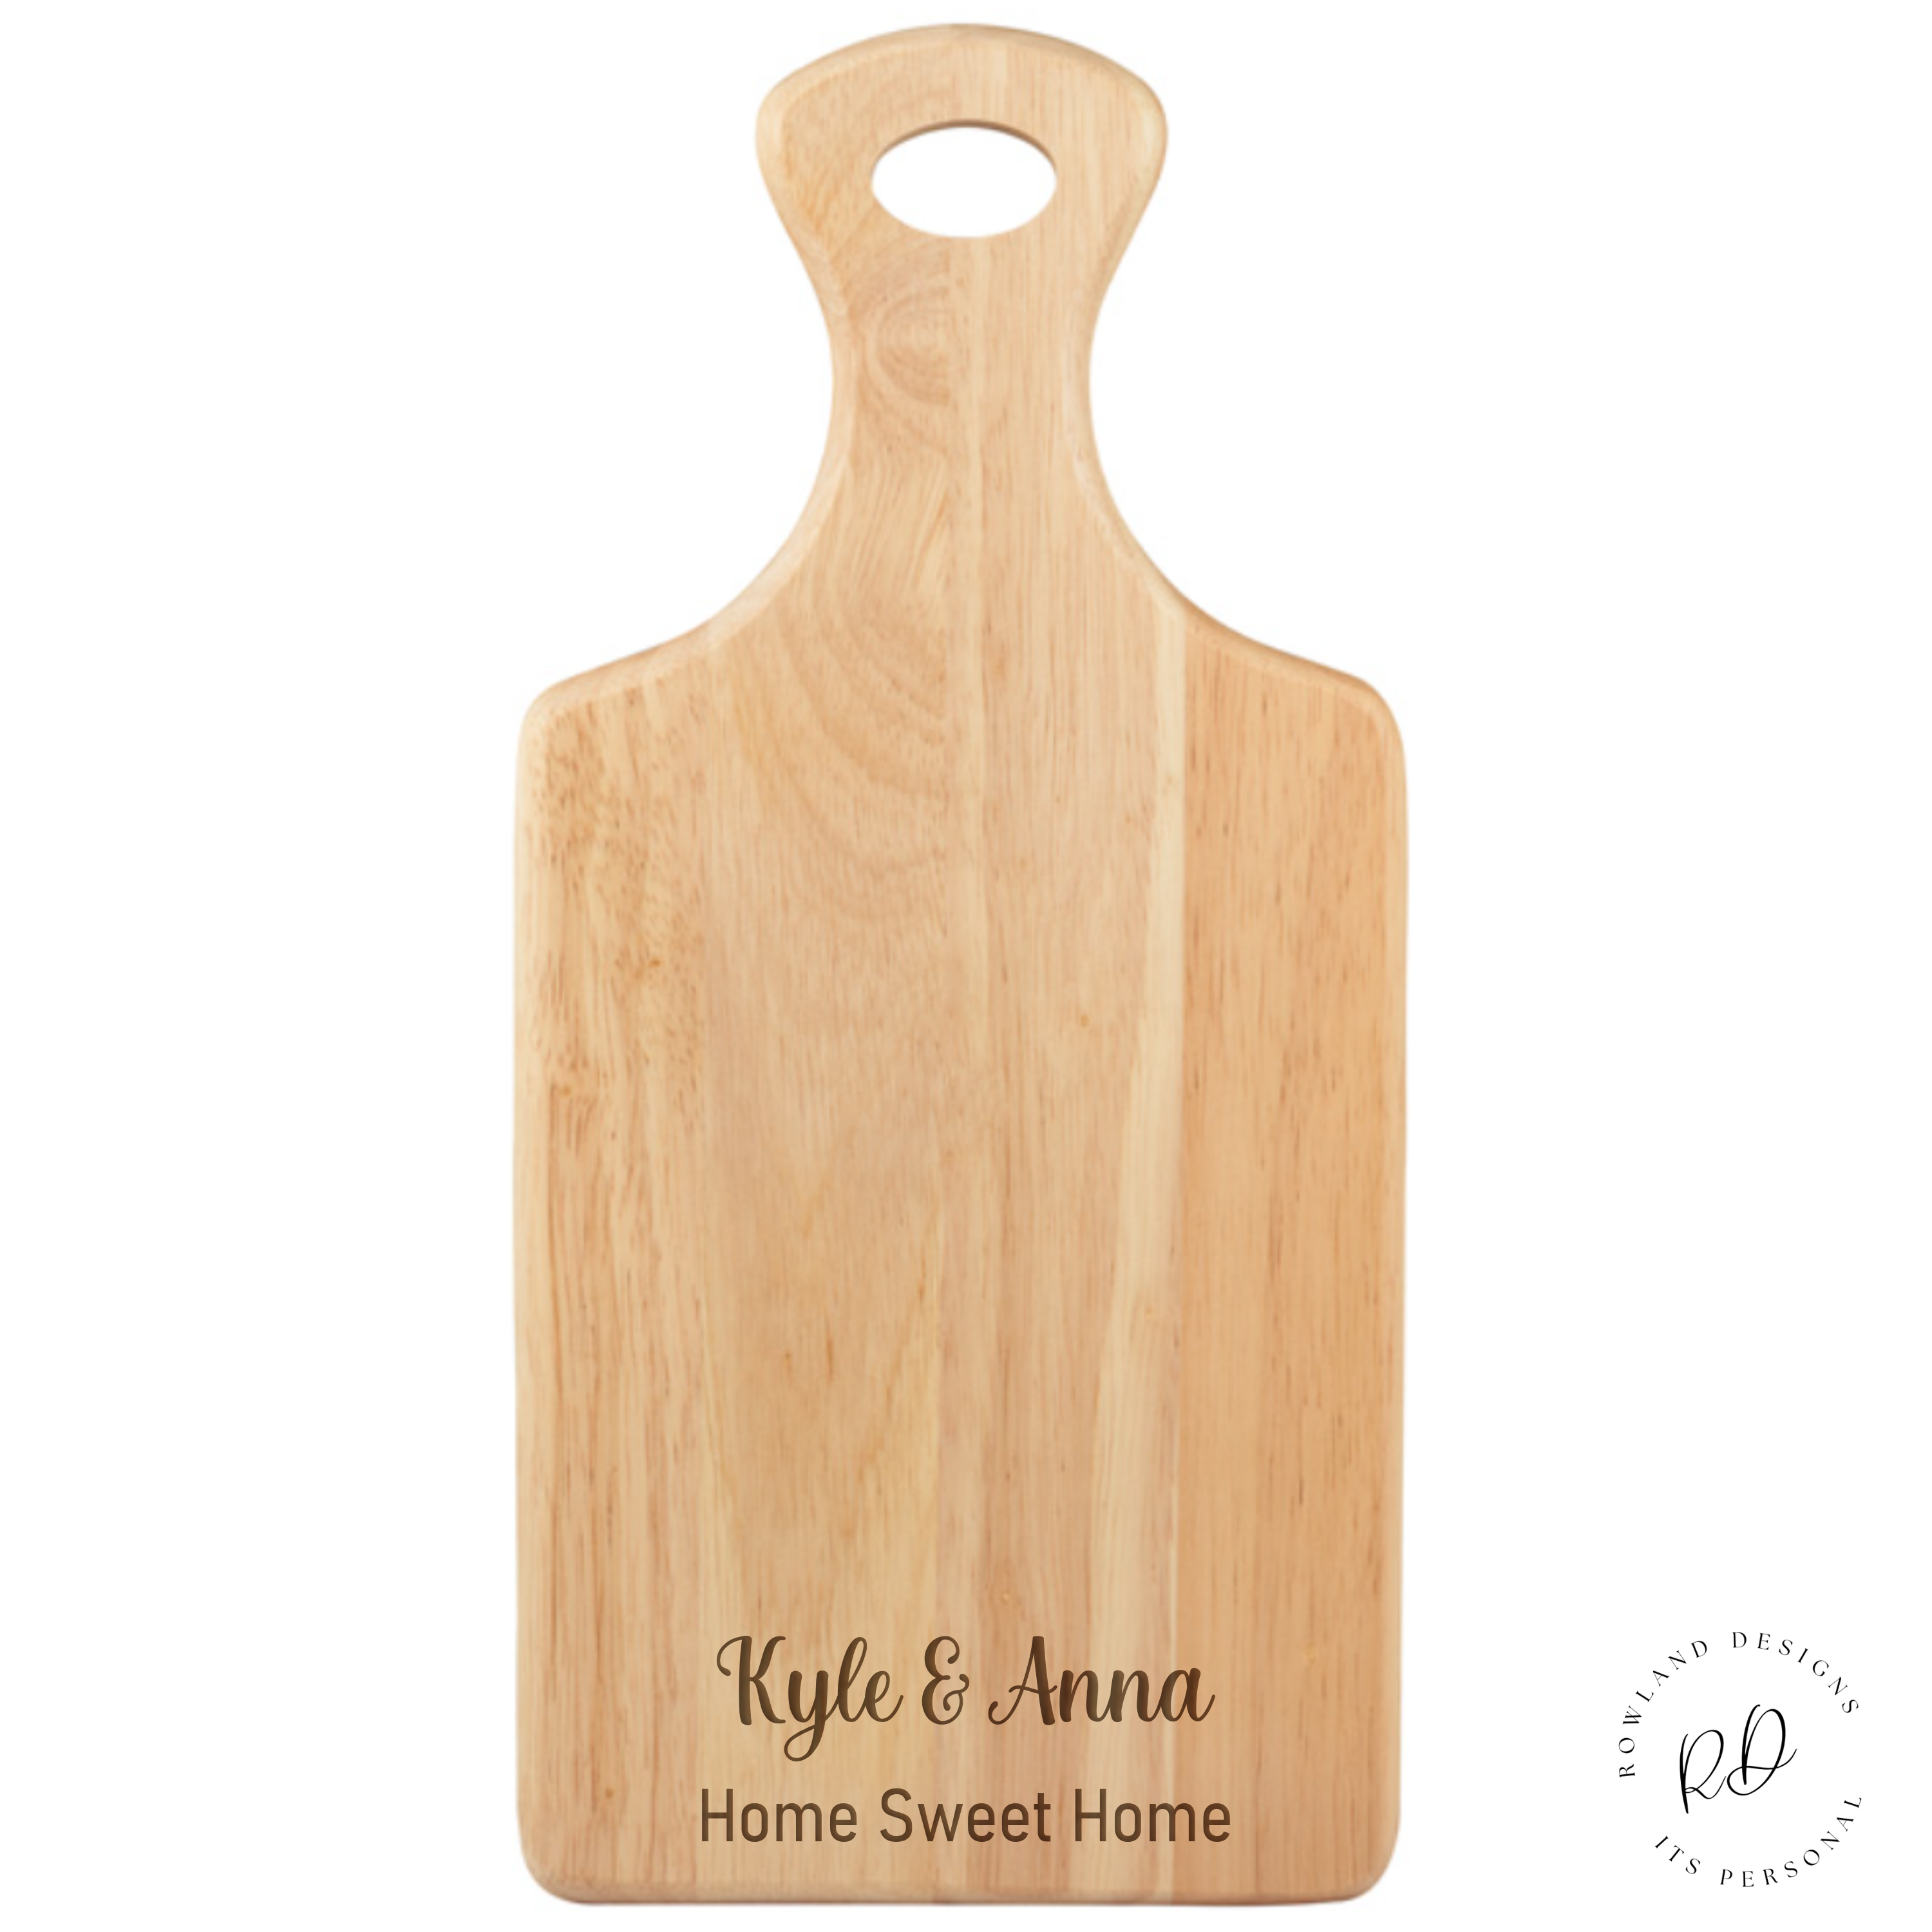 Custom Serving Board with Personalized Engraving